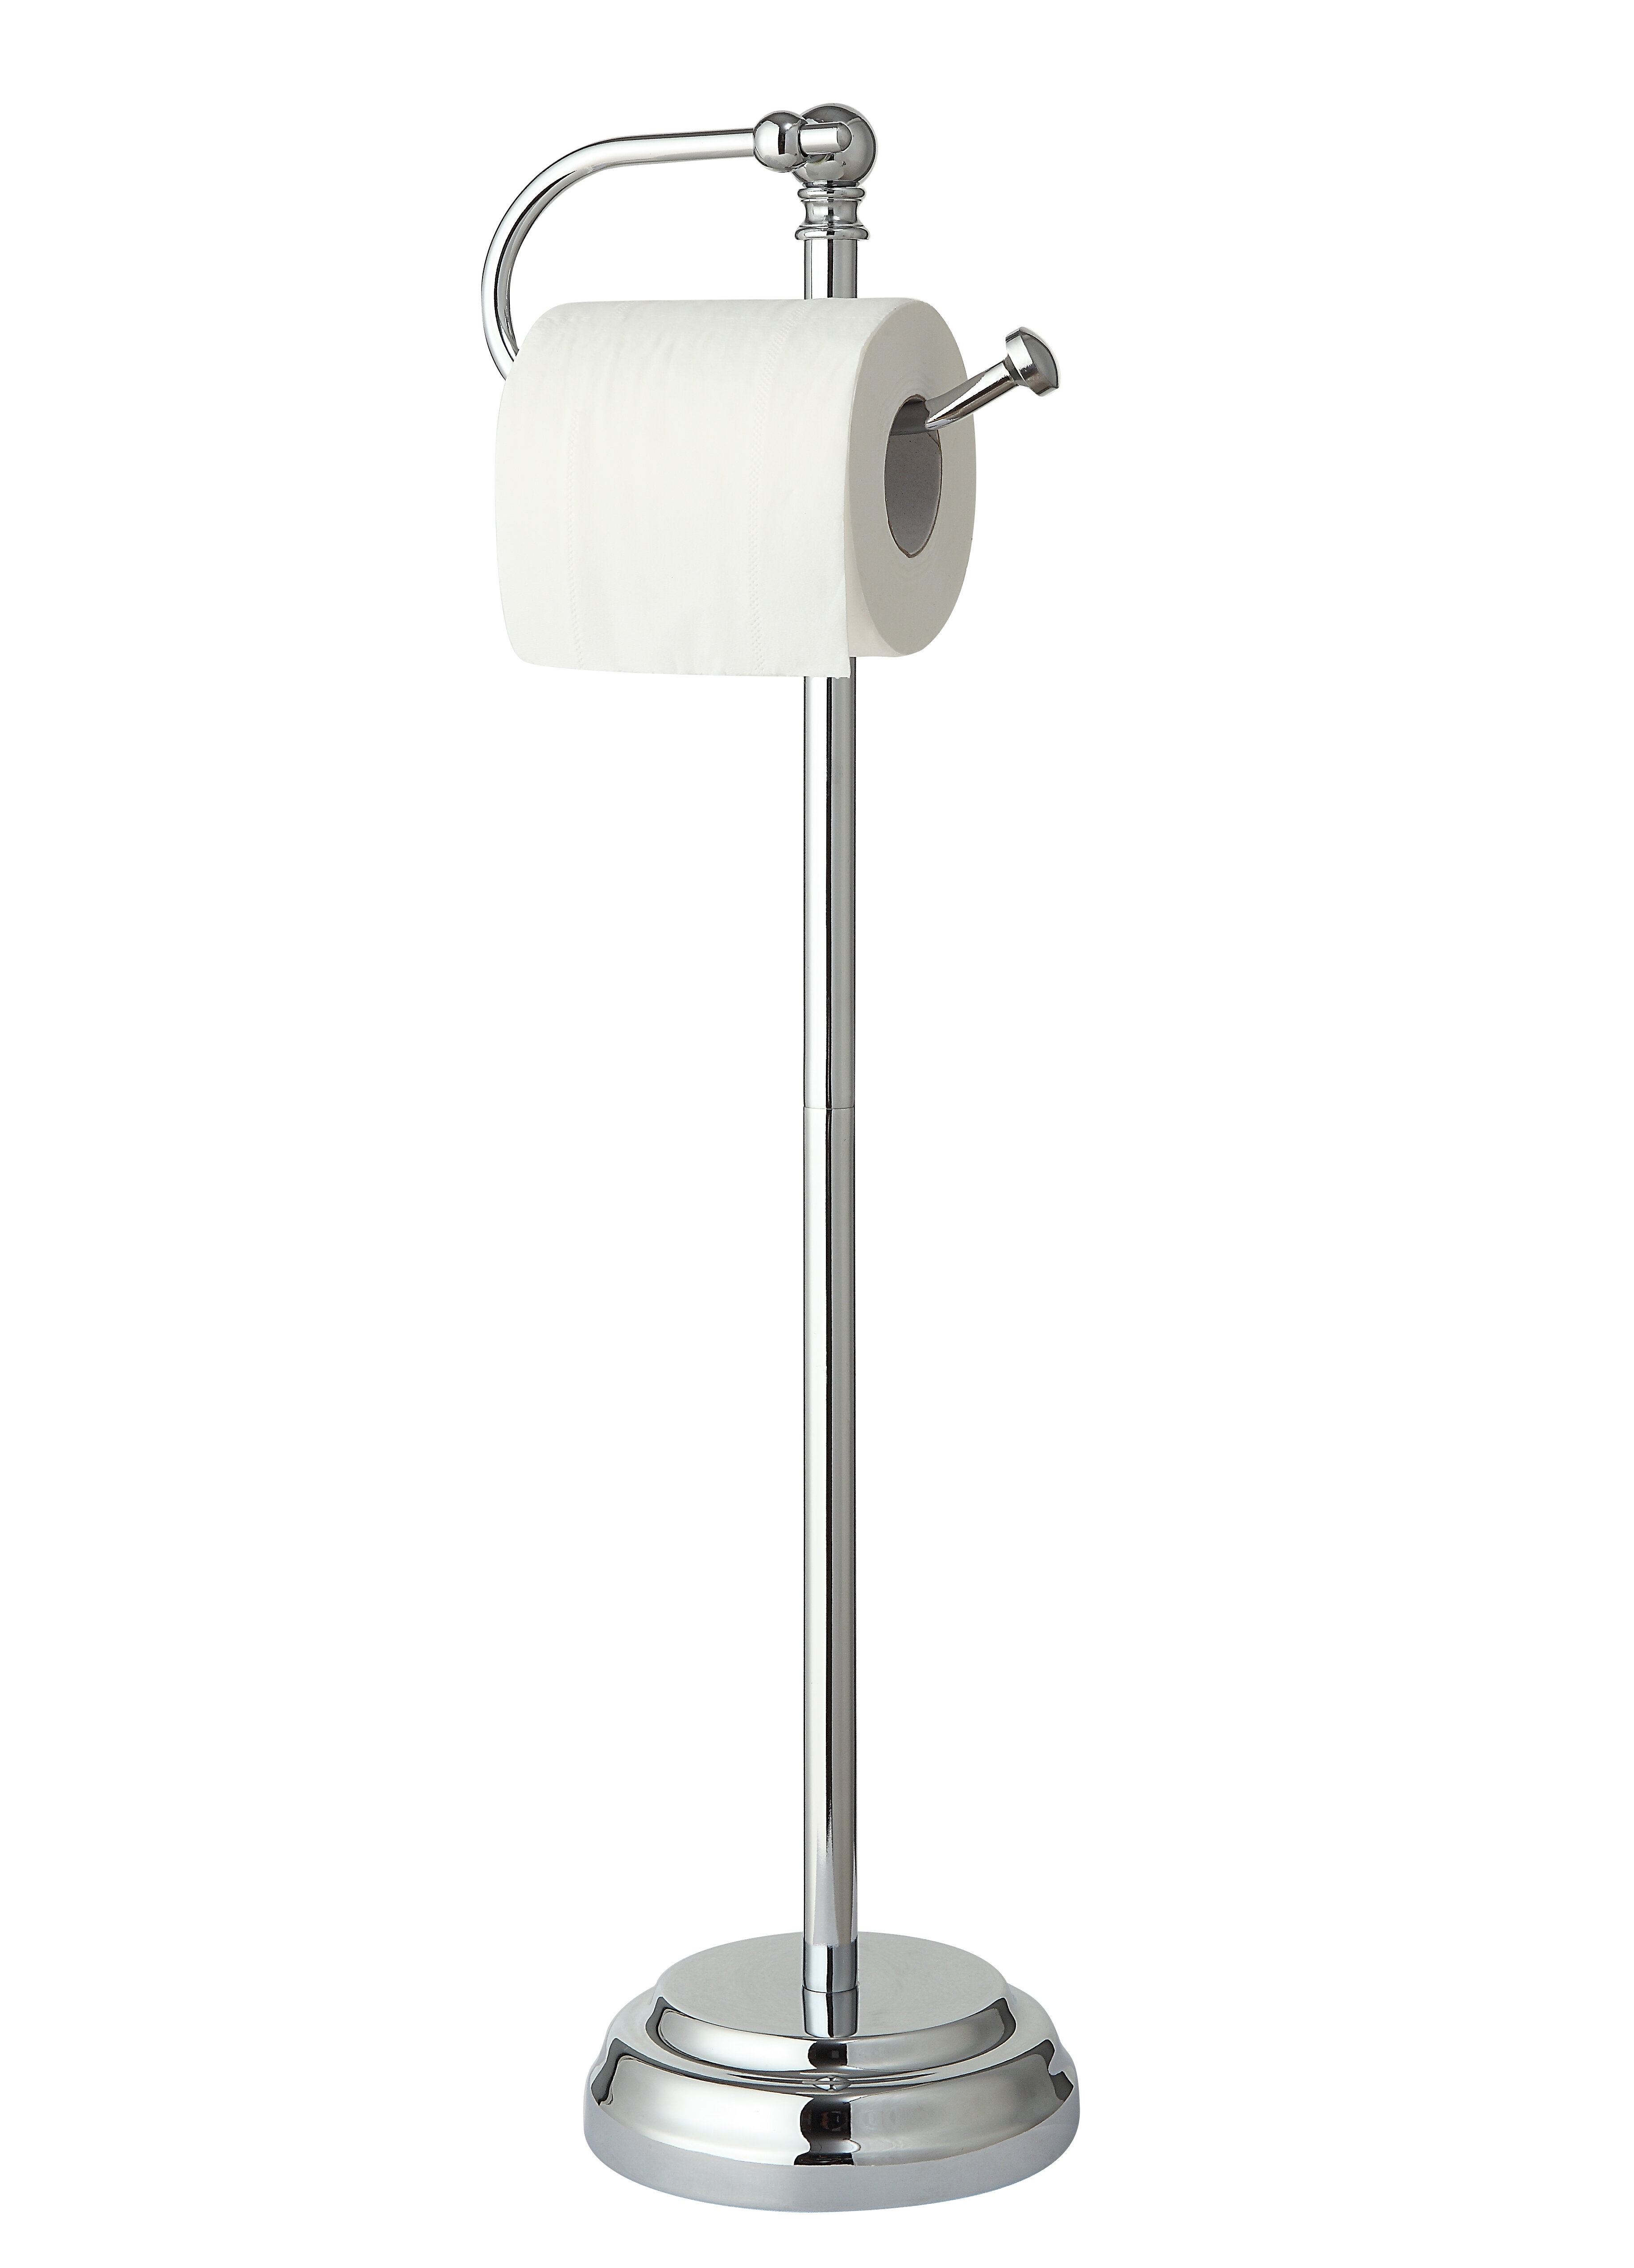 Free Standing Toilet Paper Holder With Shelf Floor Stand TP 